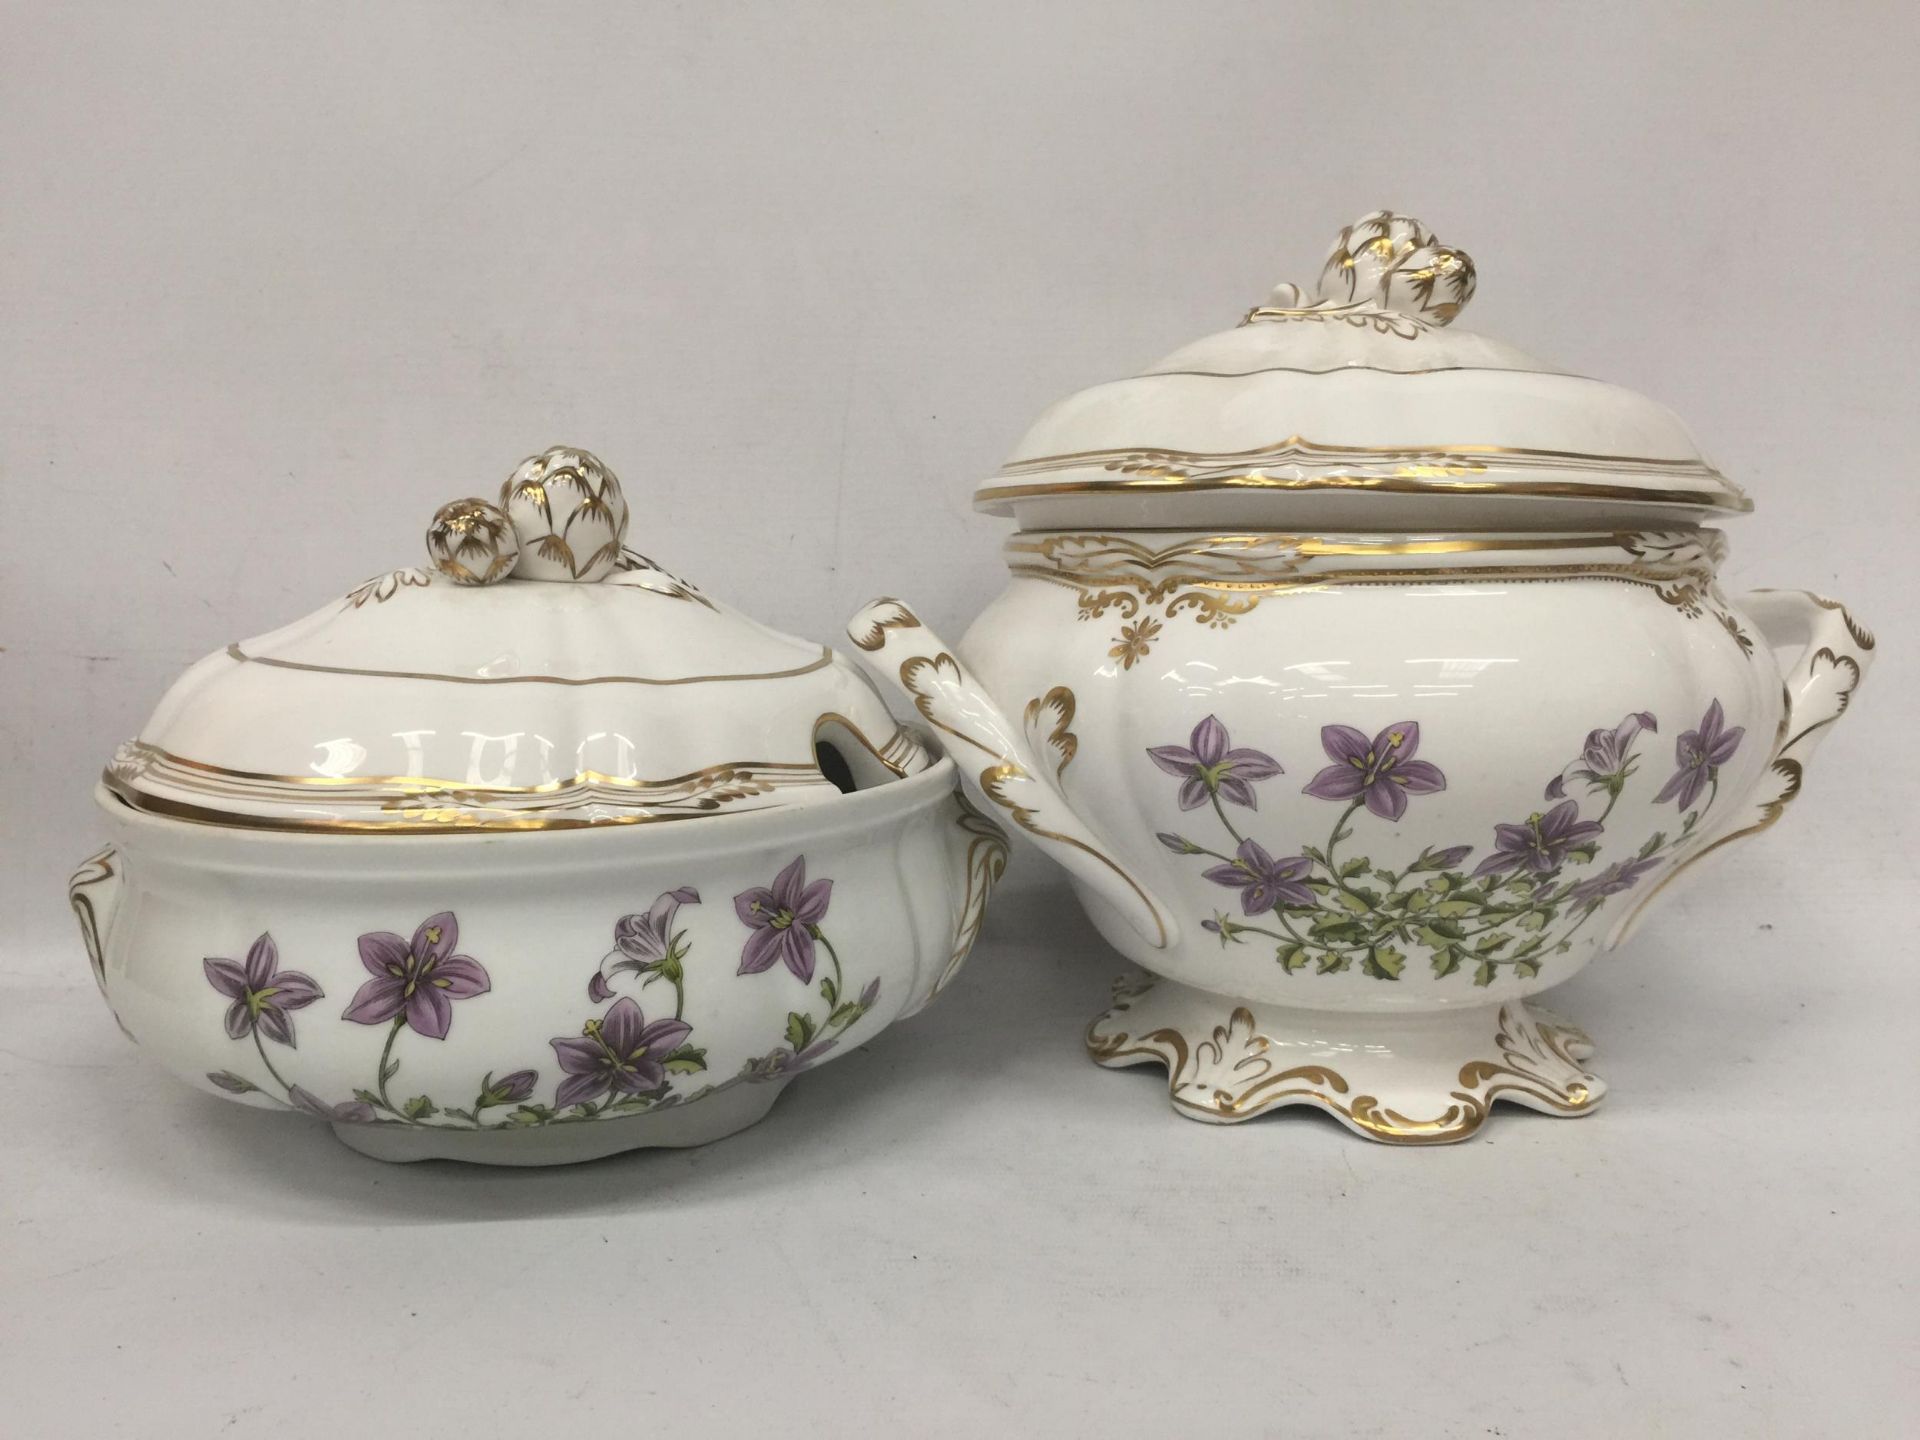 A COLLECTION OF SPODE CANTERBURY AND STAFFORD DLOWERS DINNER SERVICE ITEMS - Image 5 of 8